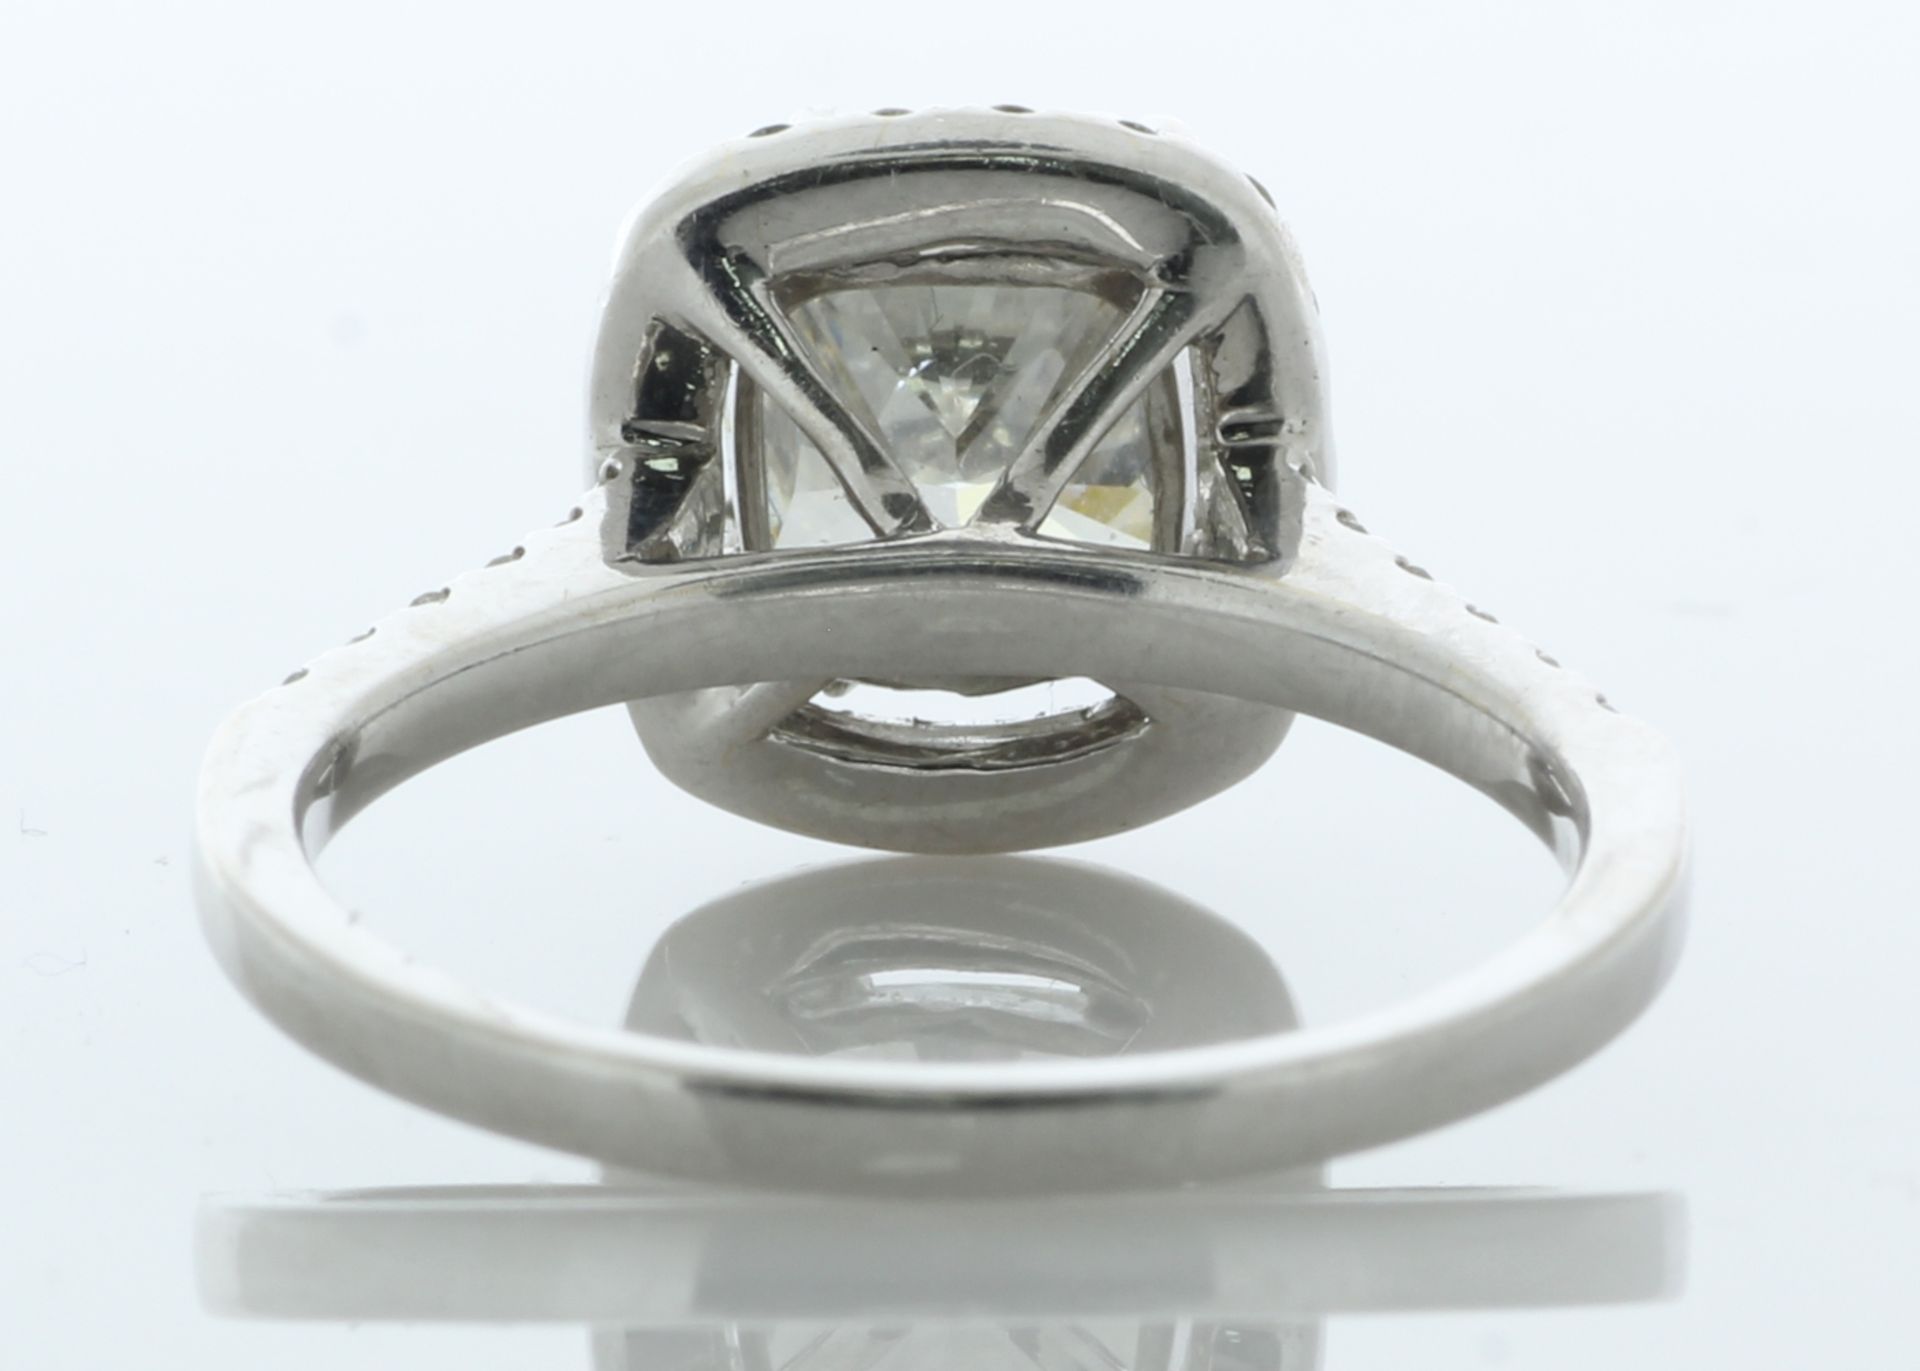 18ct White Gold Single Stone Cushion Cut Diamond Ring (2.13) 2.65 Carats - Valued by GIE £103,450.00 - Image 3 of 5